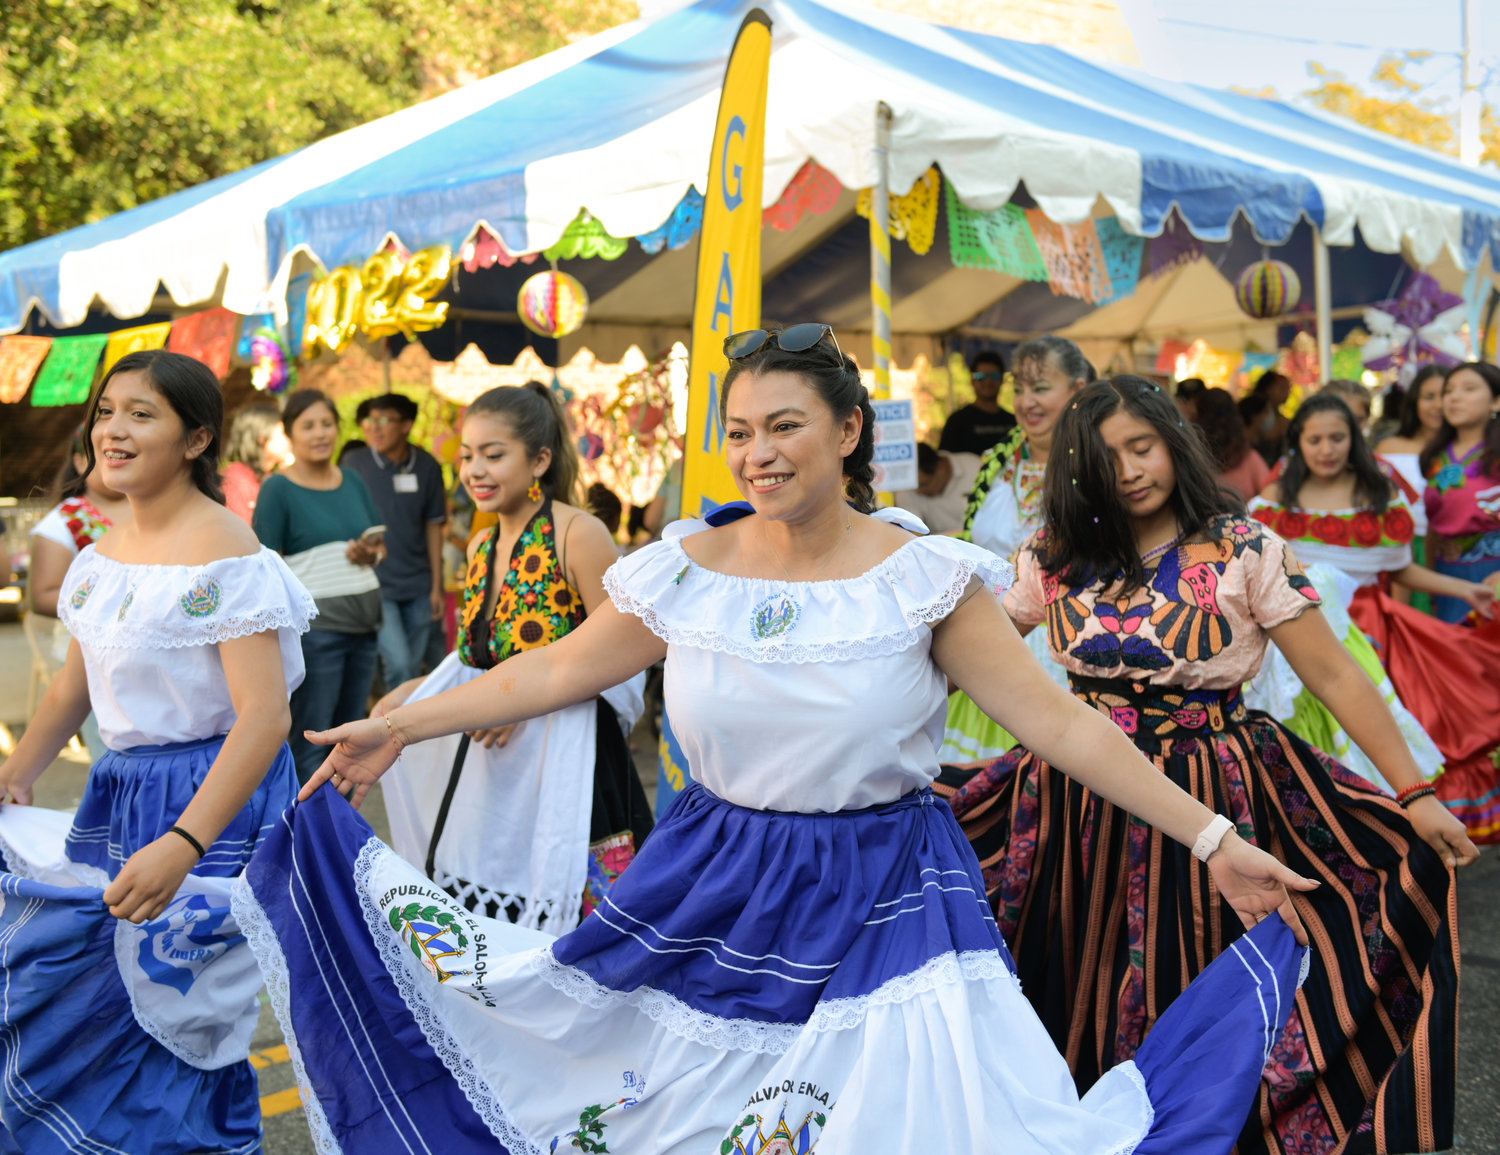 The Parade of Traditional Outfits & Quinceañeras was a highlight of Saturday's event at The Hispanic Heritage Festival.